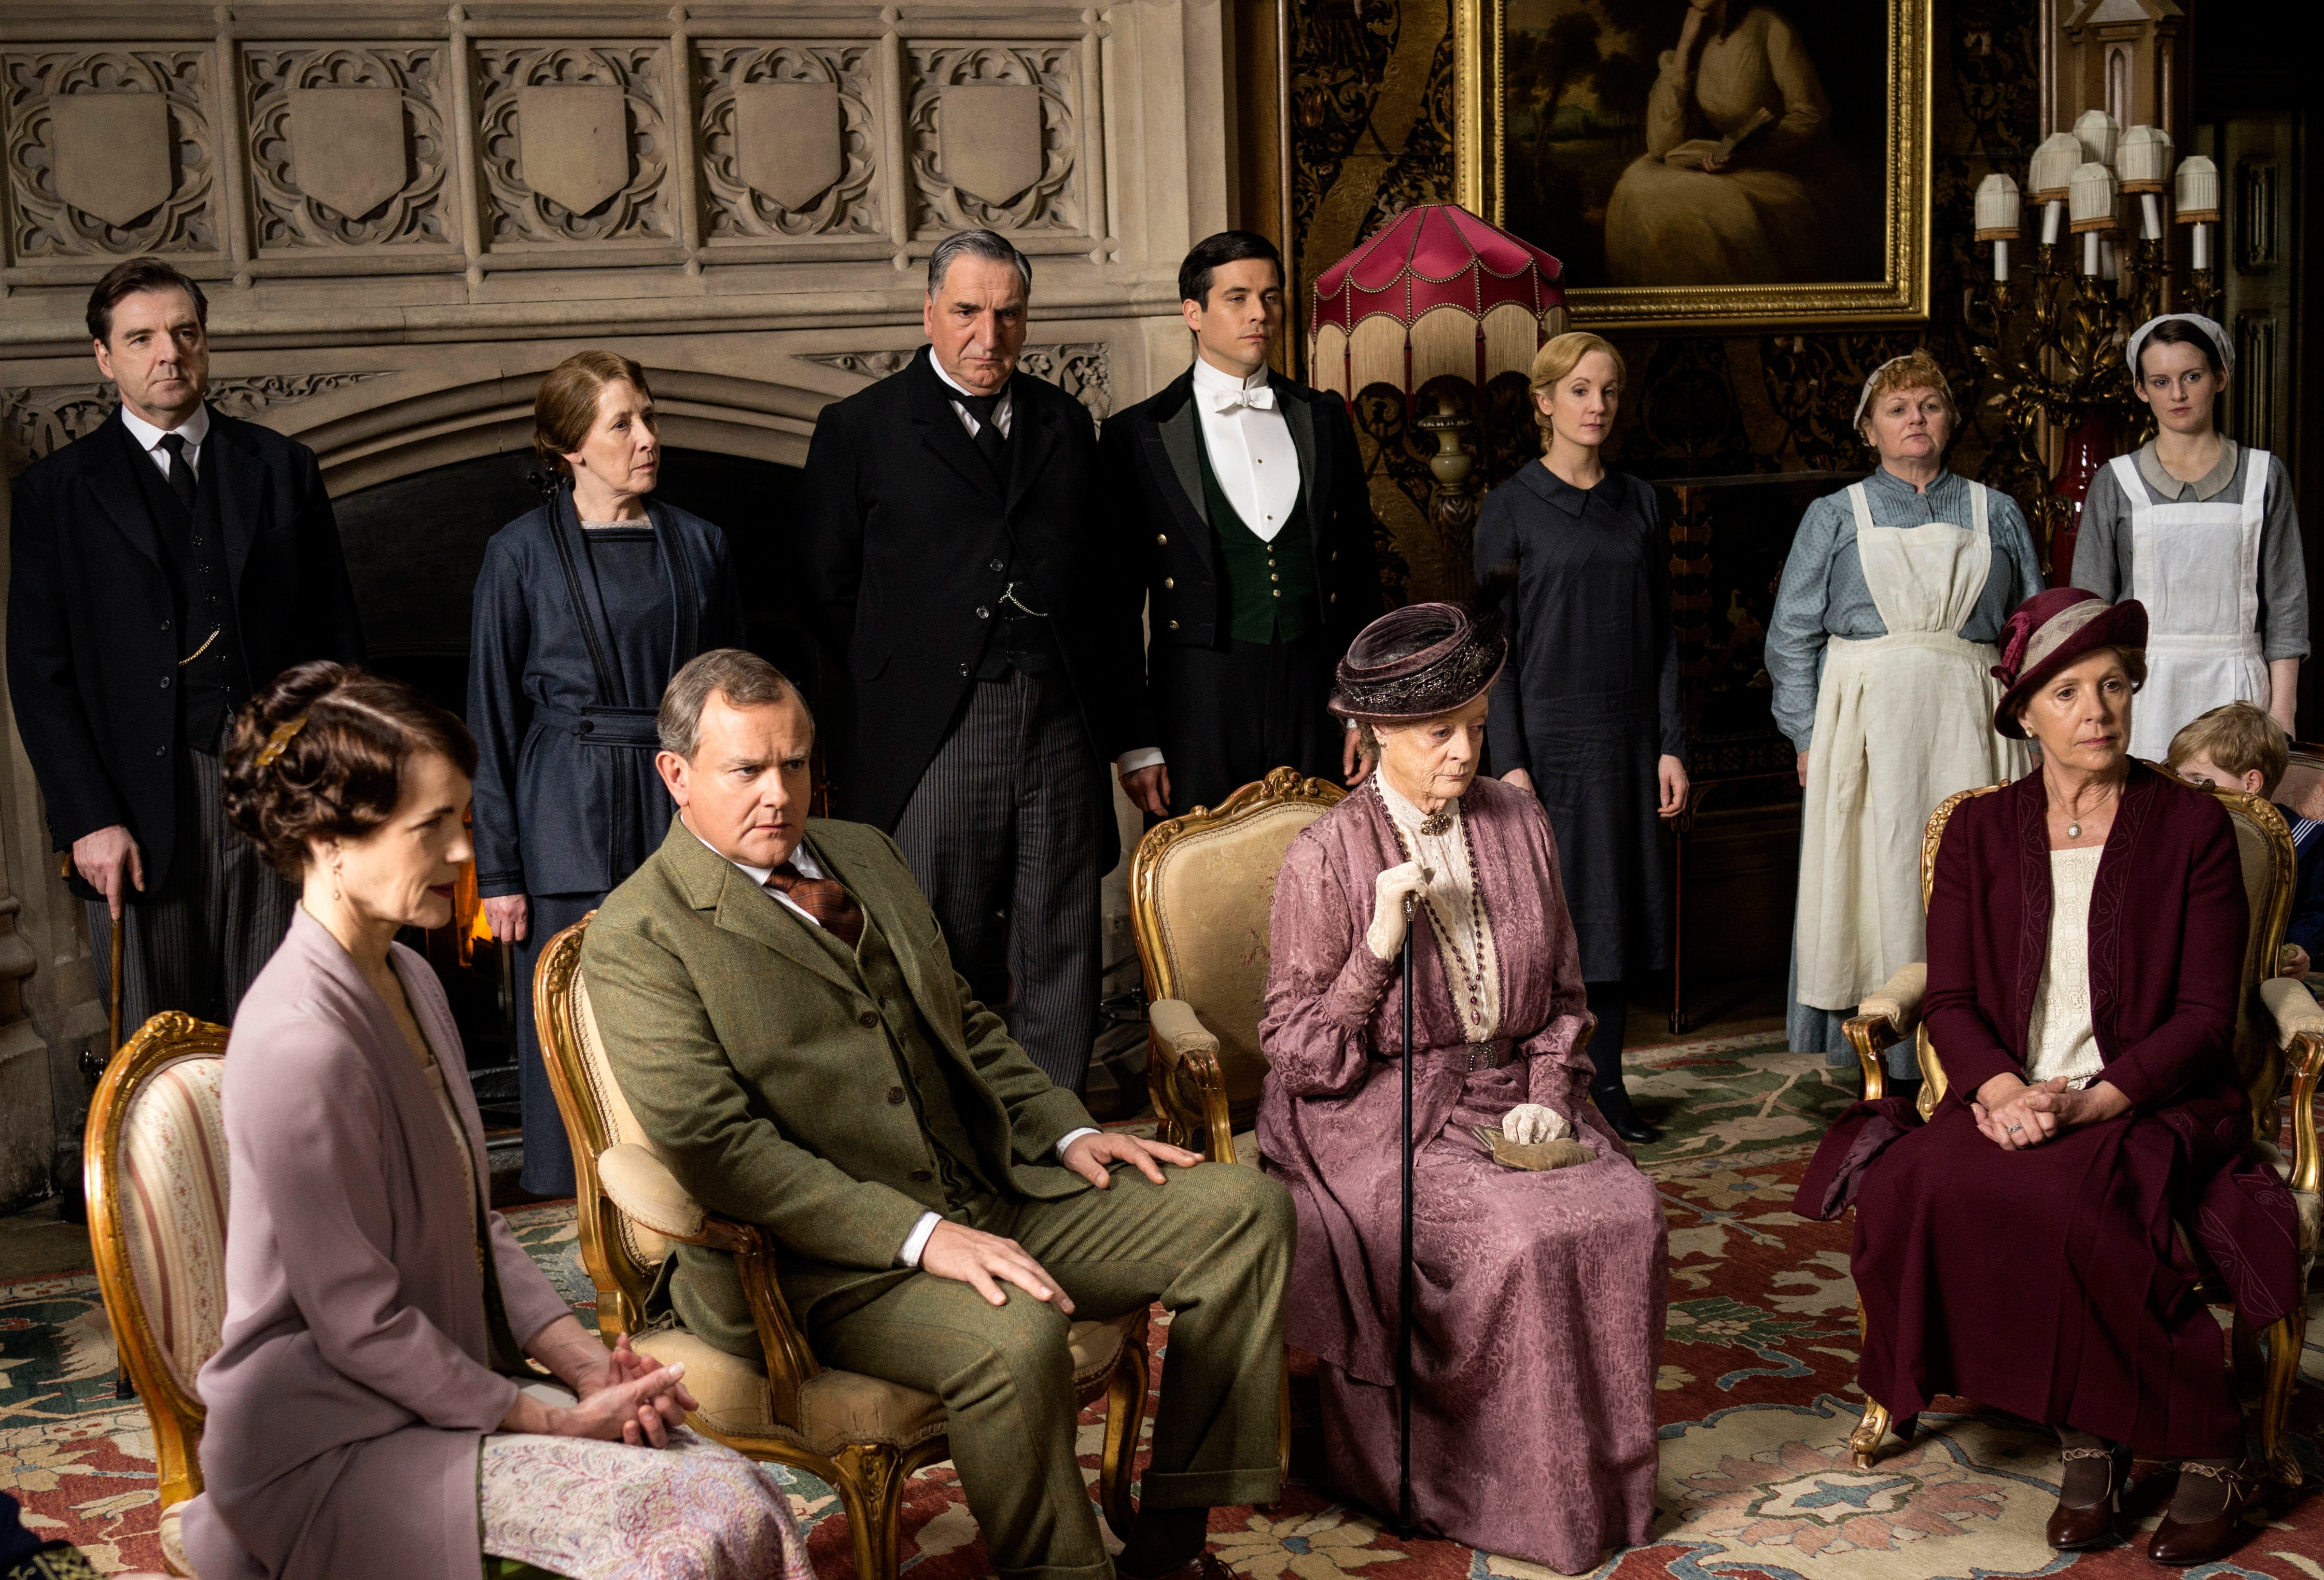 the series, actors, drama, characters, Downton Abbey